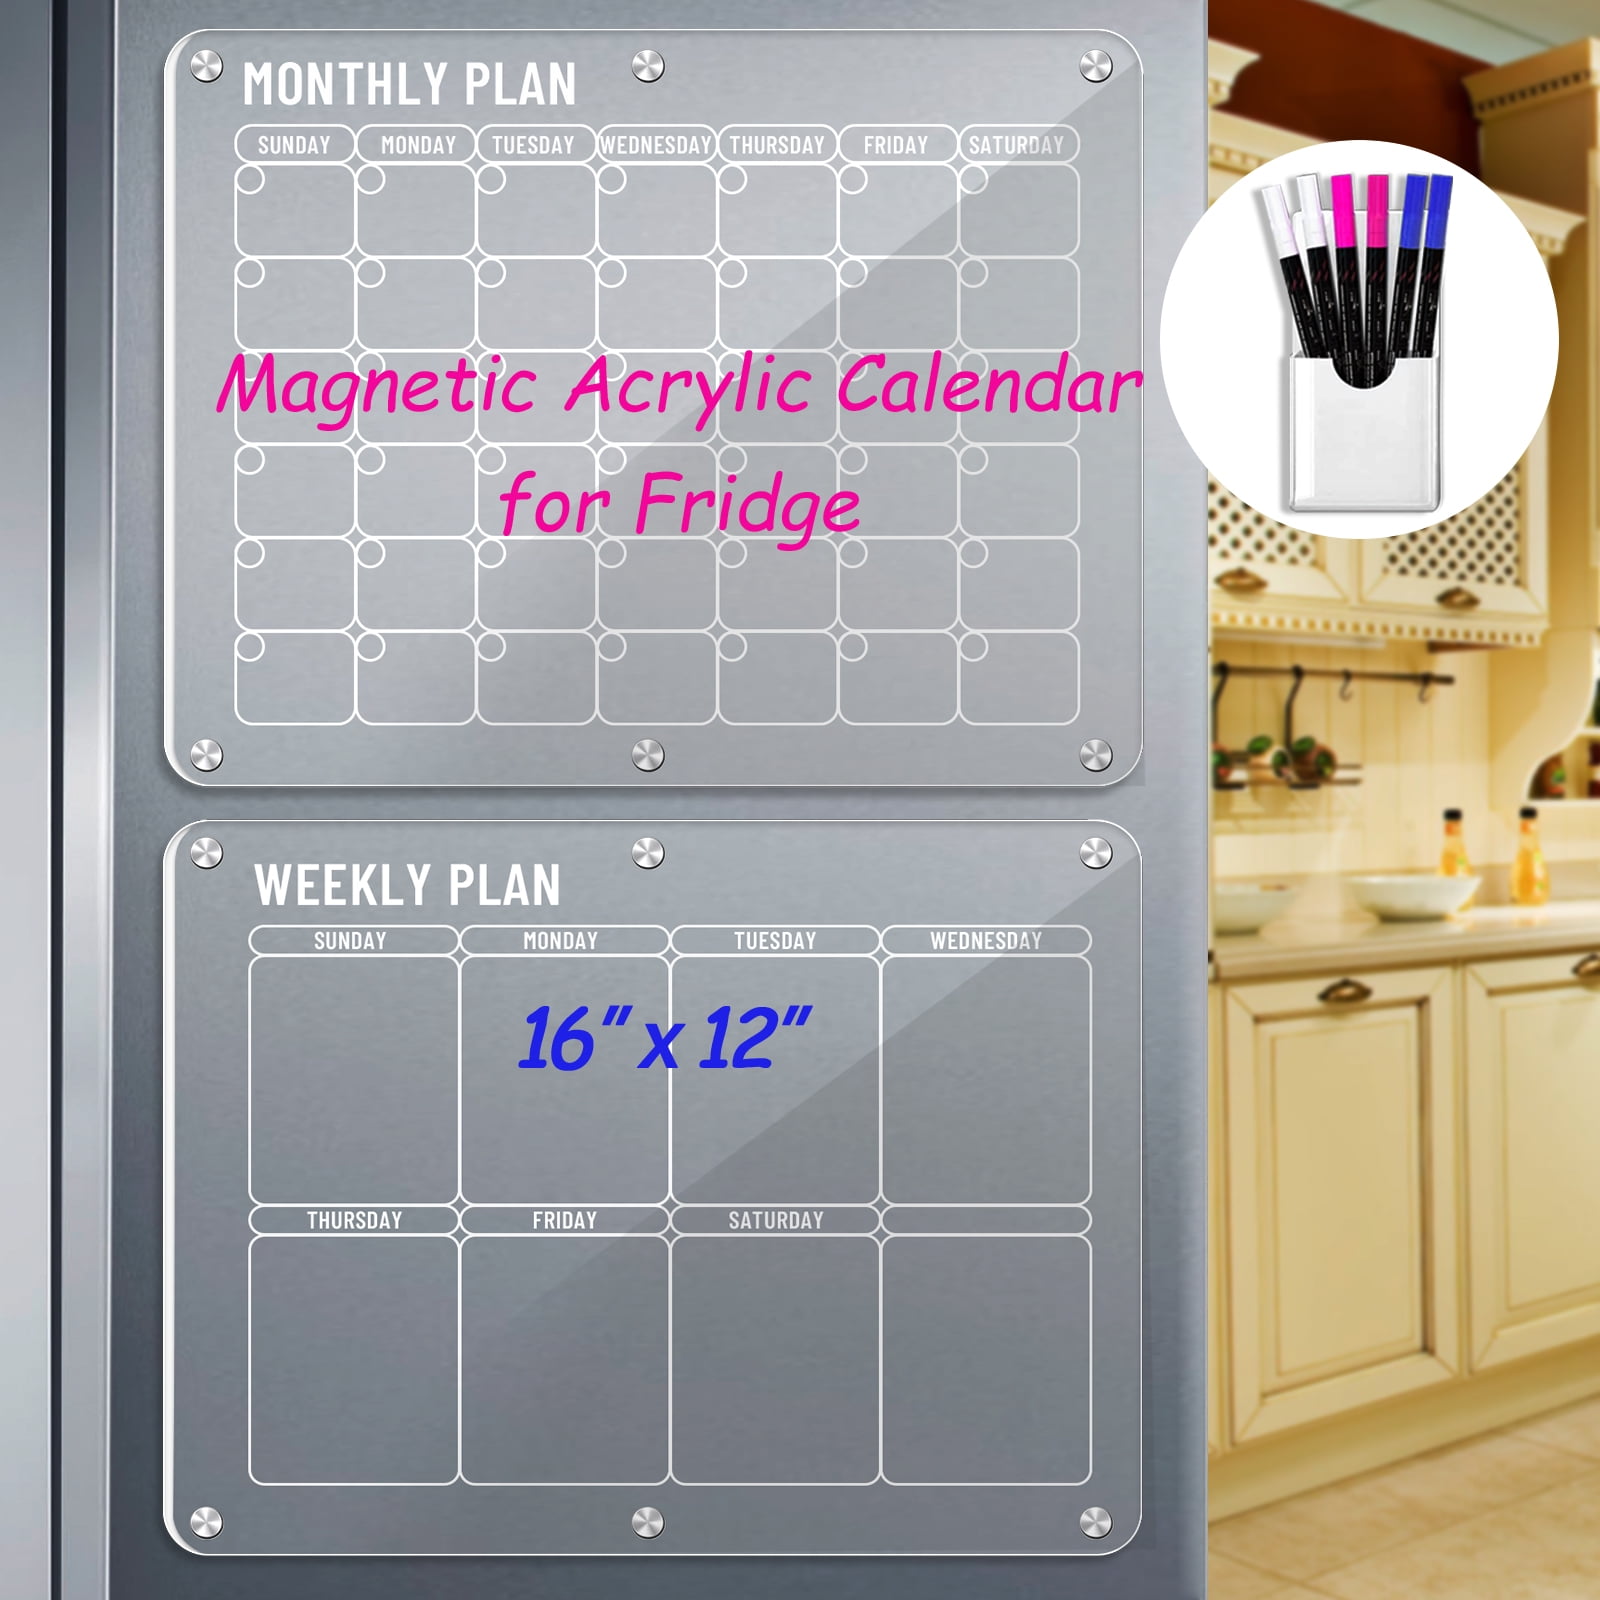  2PCS Magnetic Acrylic Monthly and Weekly Calendar for Fridge,  16x12 Clear Dry Erase Board Calendar for Fridge Reusable Planner,  Includes 12 Dry Erase Markers with 3 Colors : Office Products